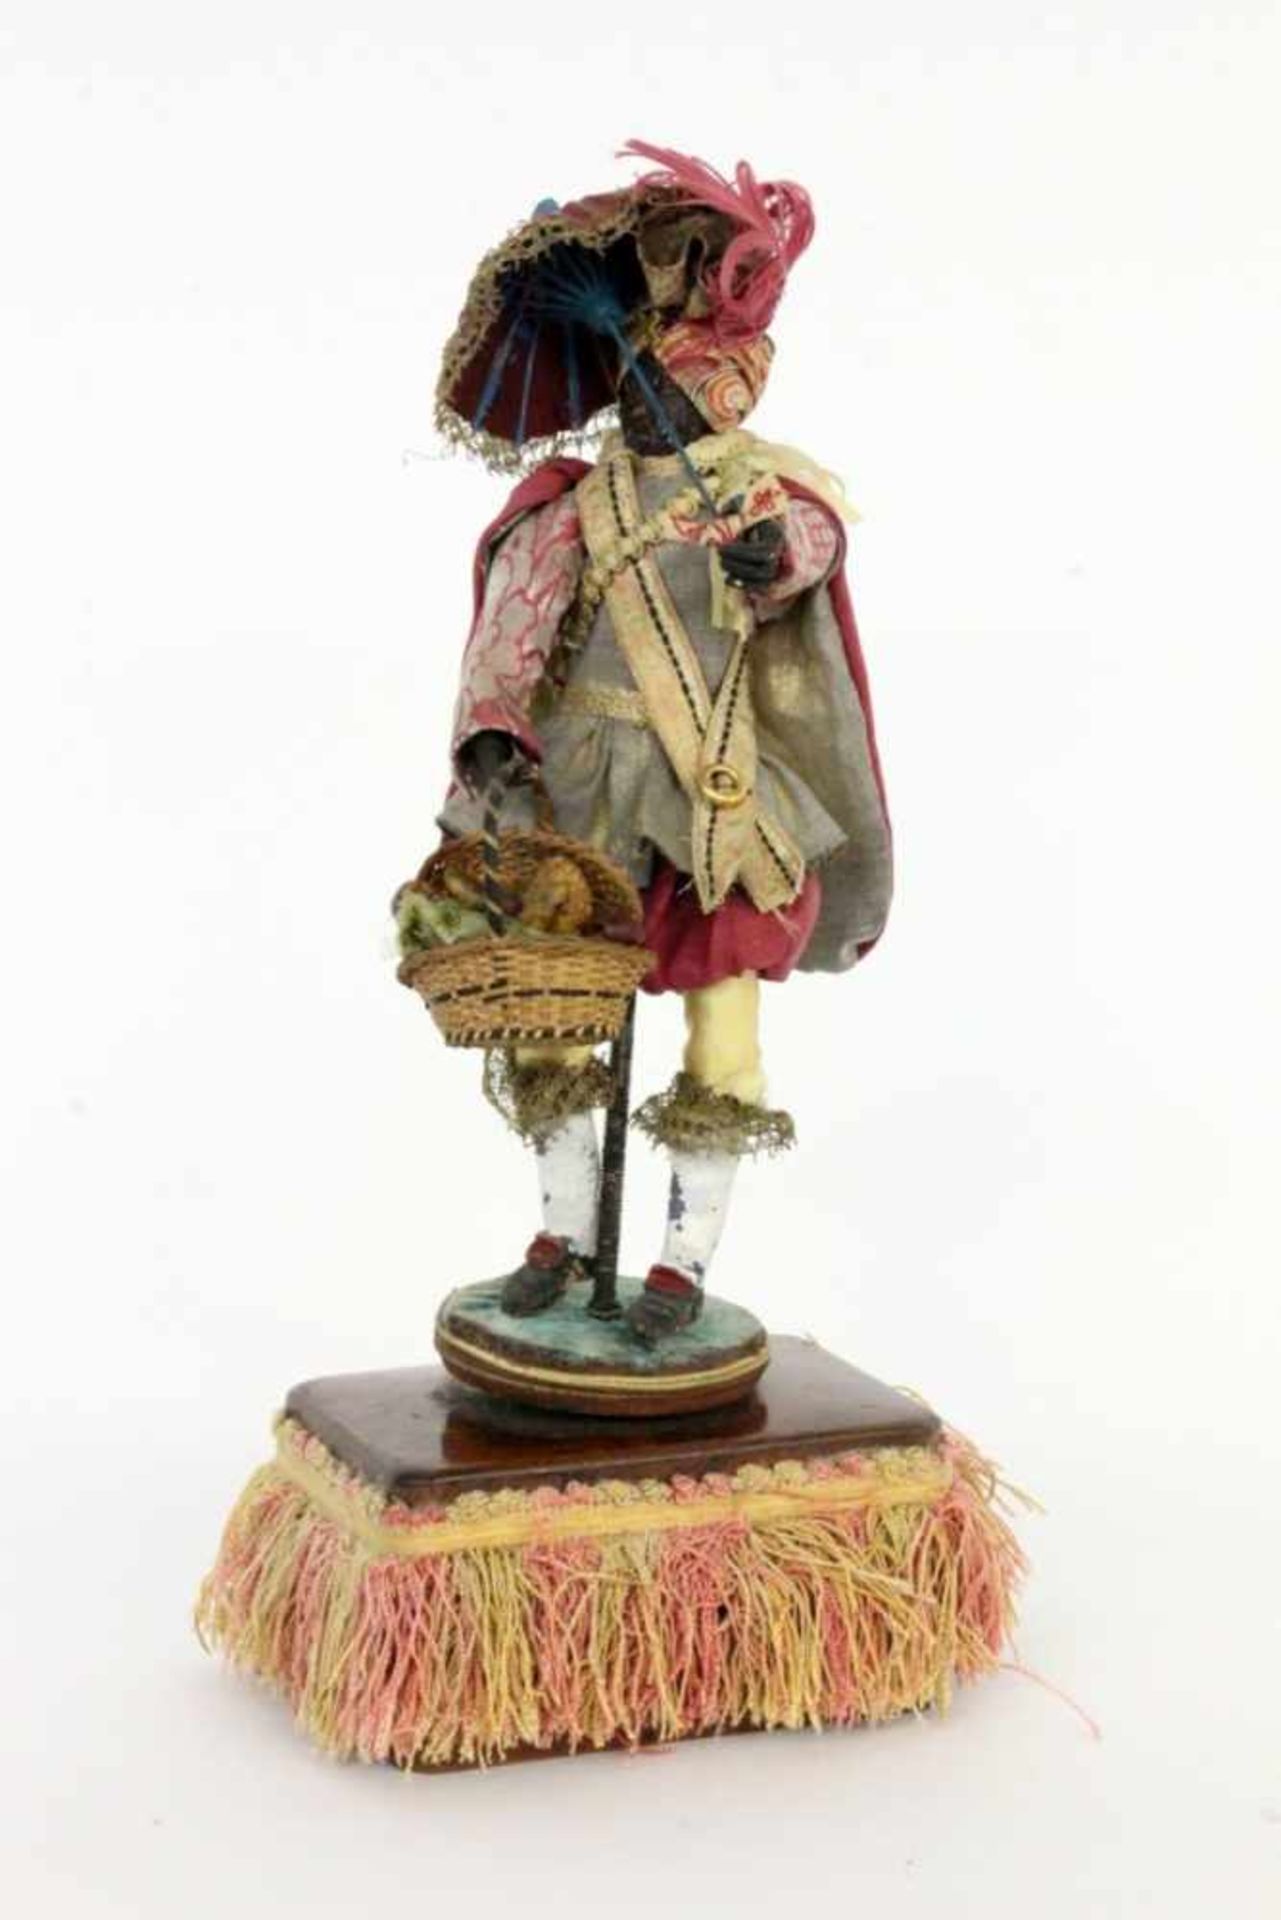 ''A DOLL AUTOMATON WITH VENETIAN MOOR France, 19th century Beautifully attired doll on a